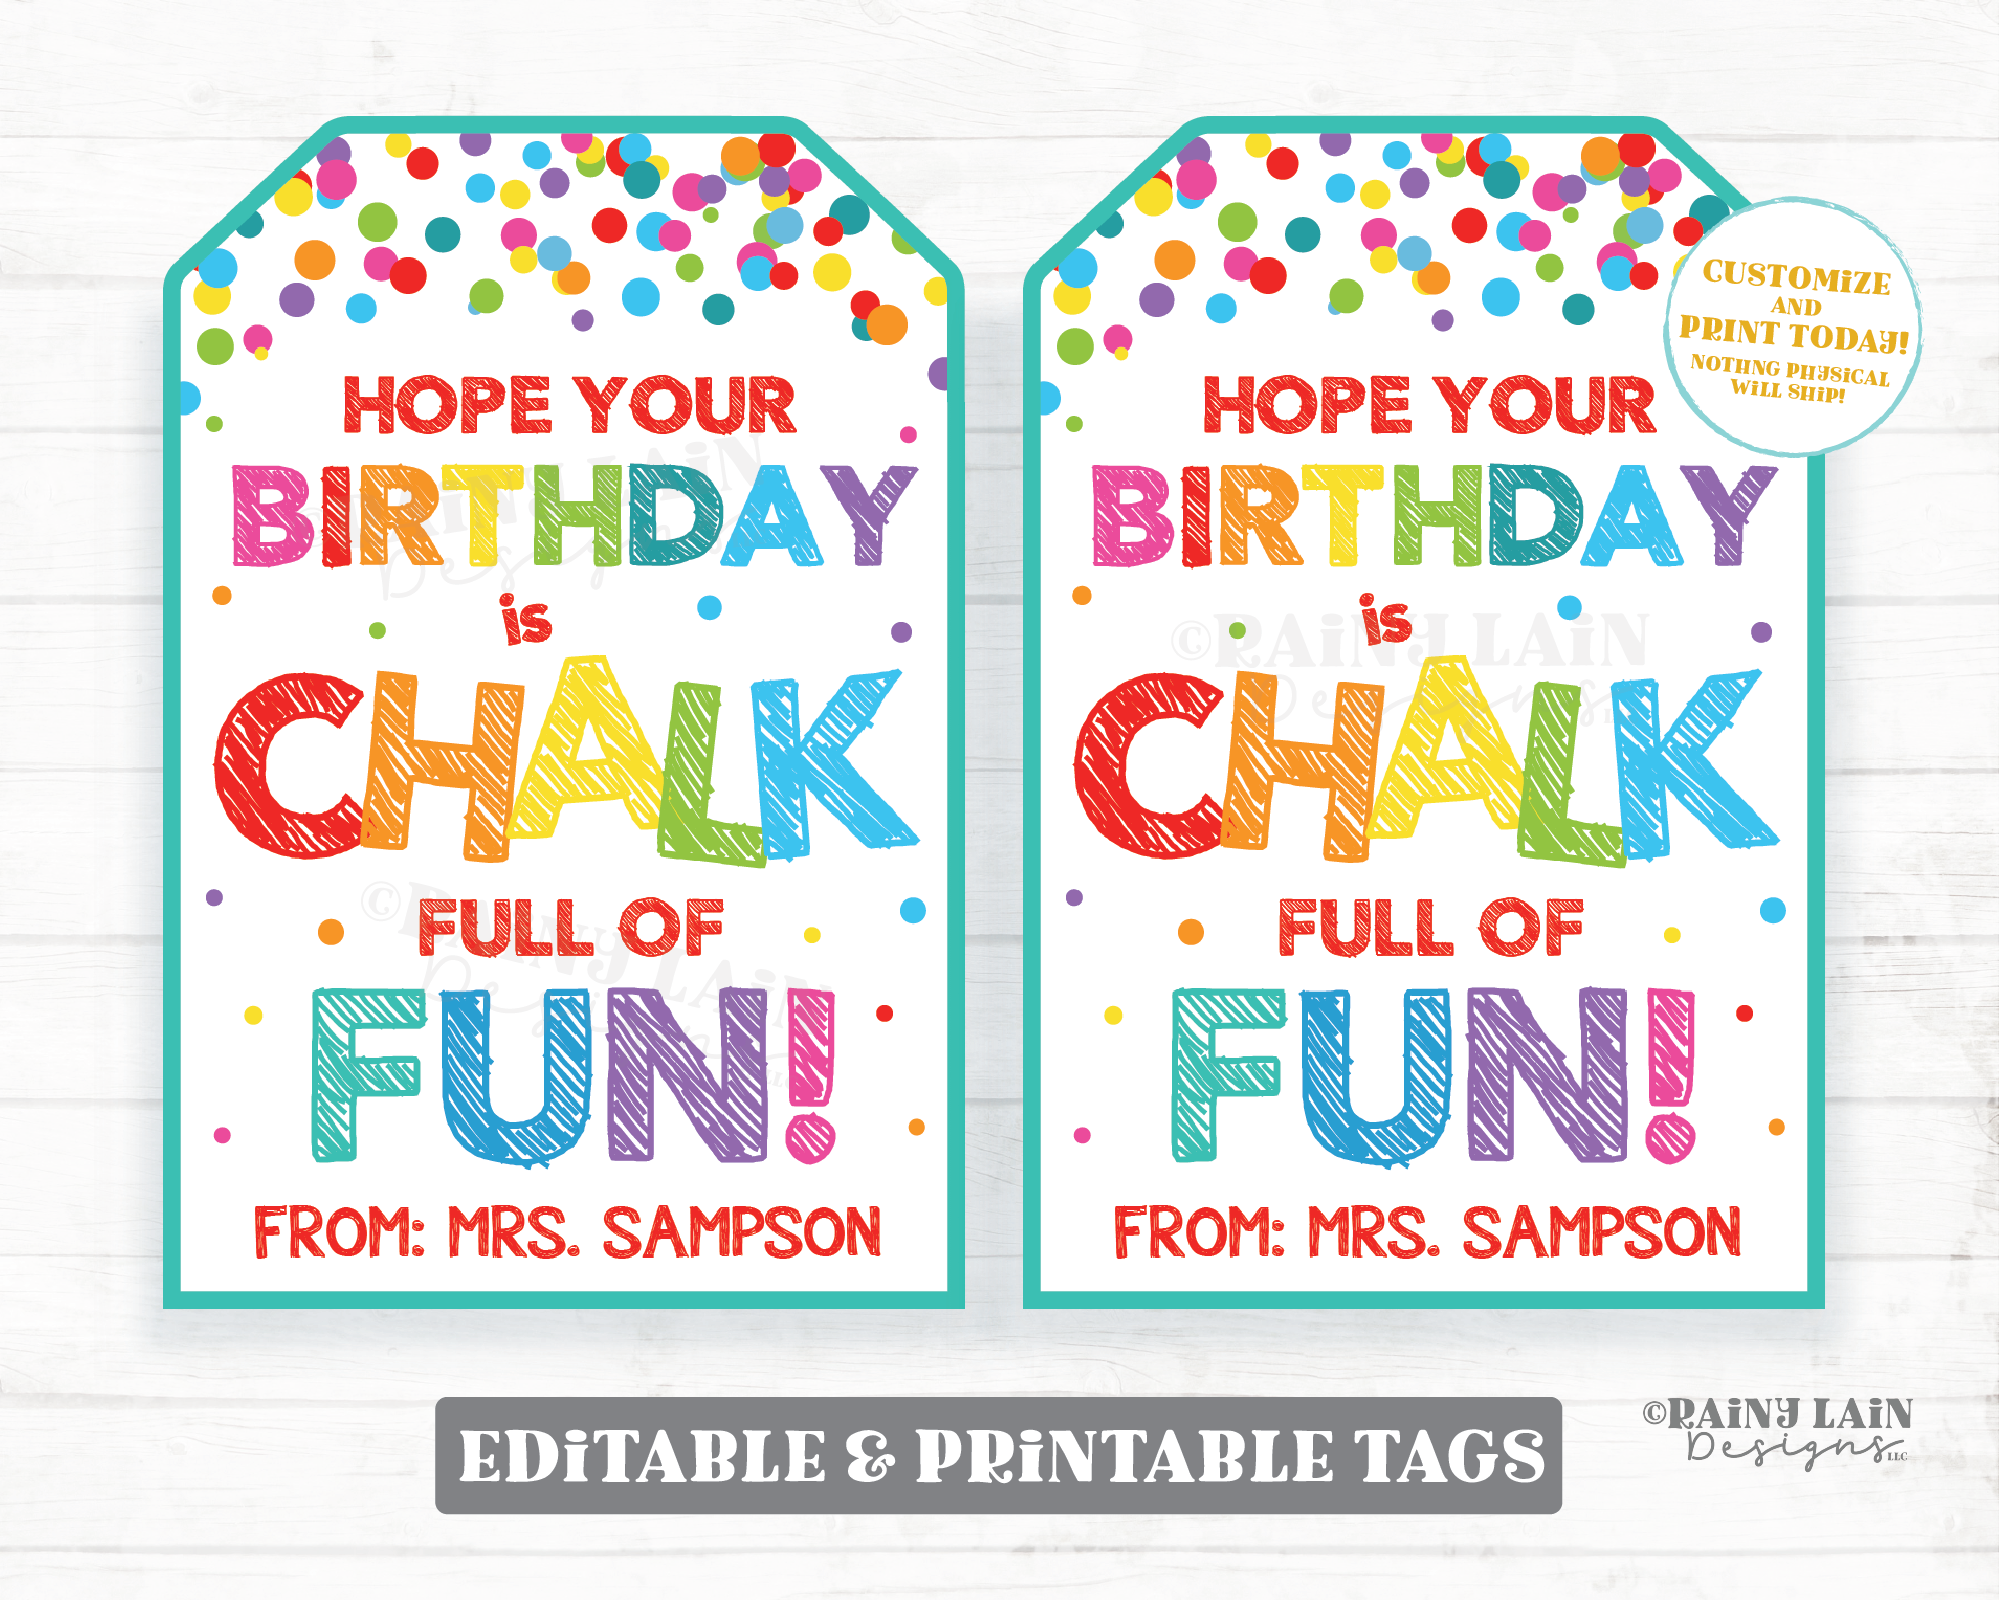 Hope your birthday is chalk full of fun Tag Happy Birthday Tags Chalk Favor Gift Tag Teacher to Student School Printable Editable Confetti